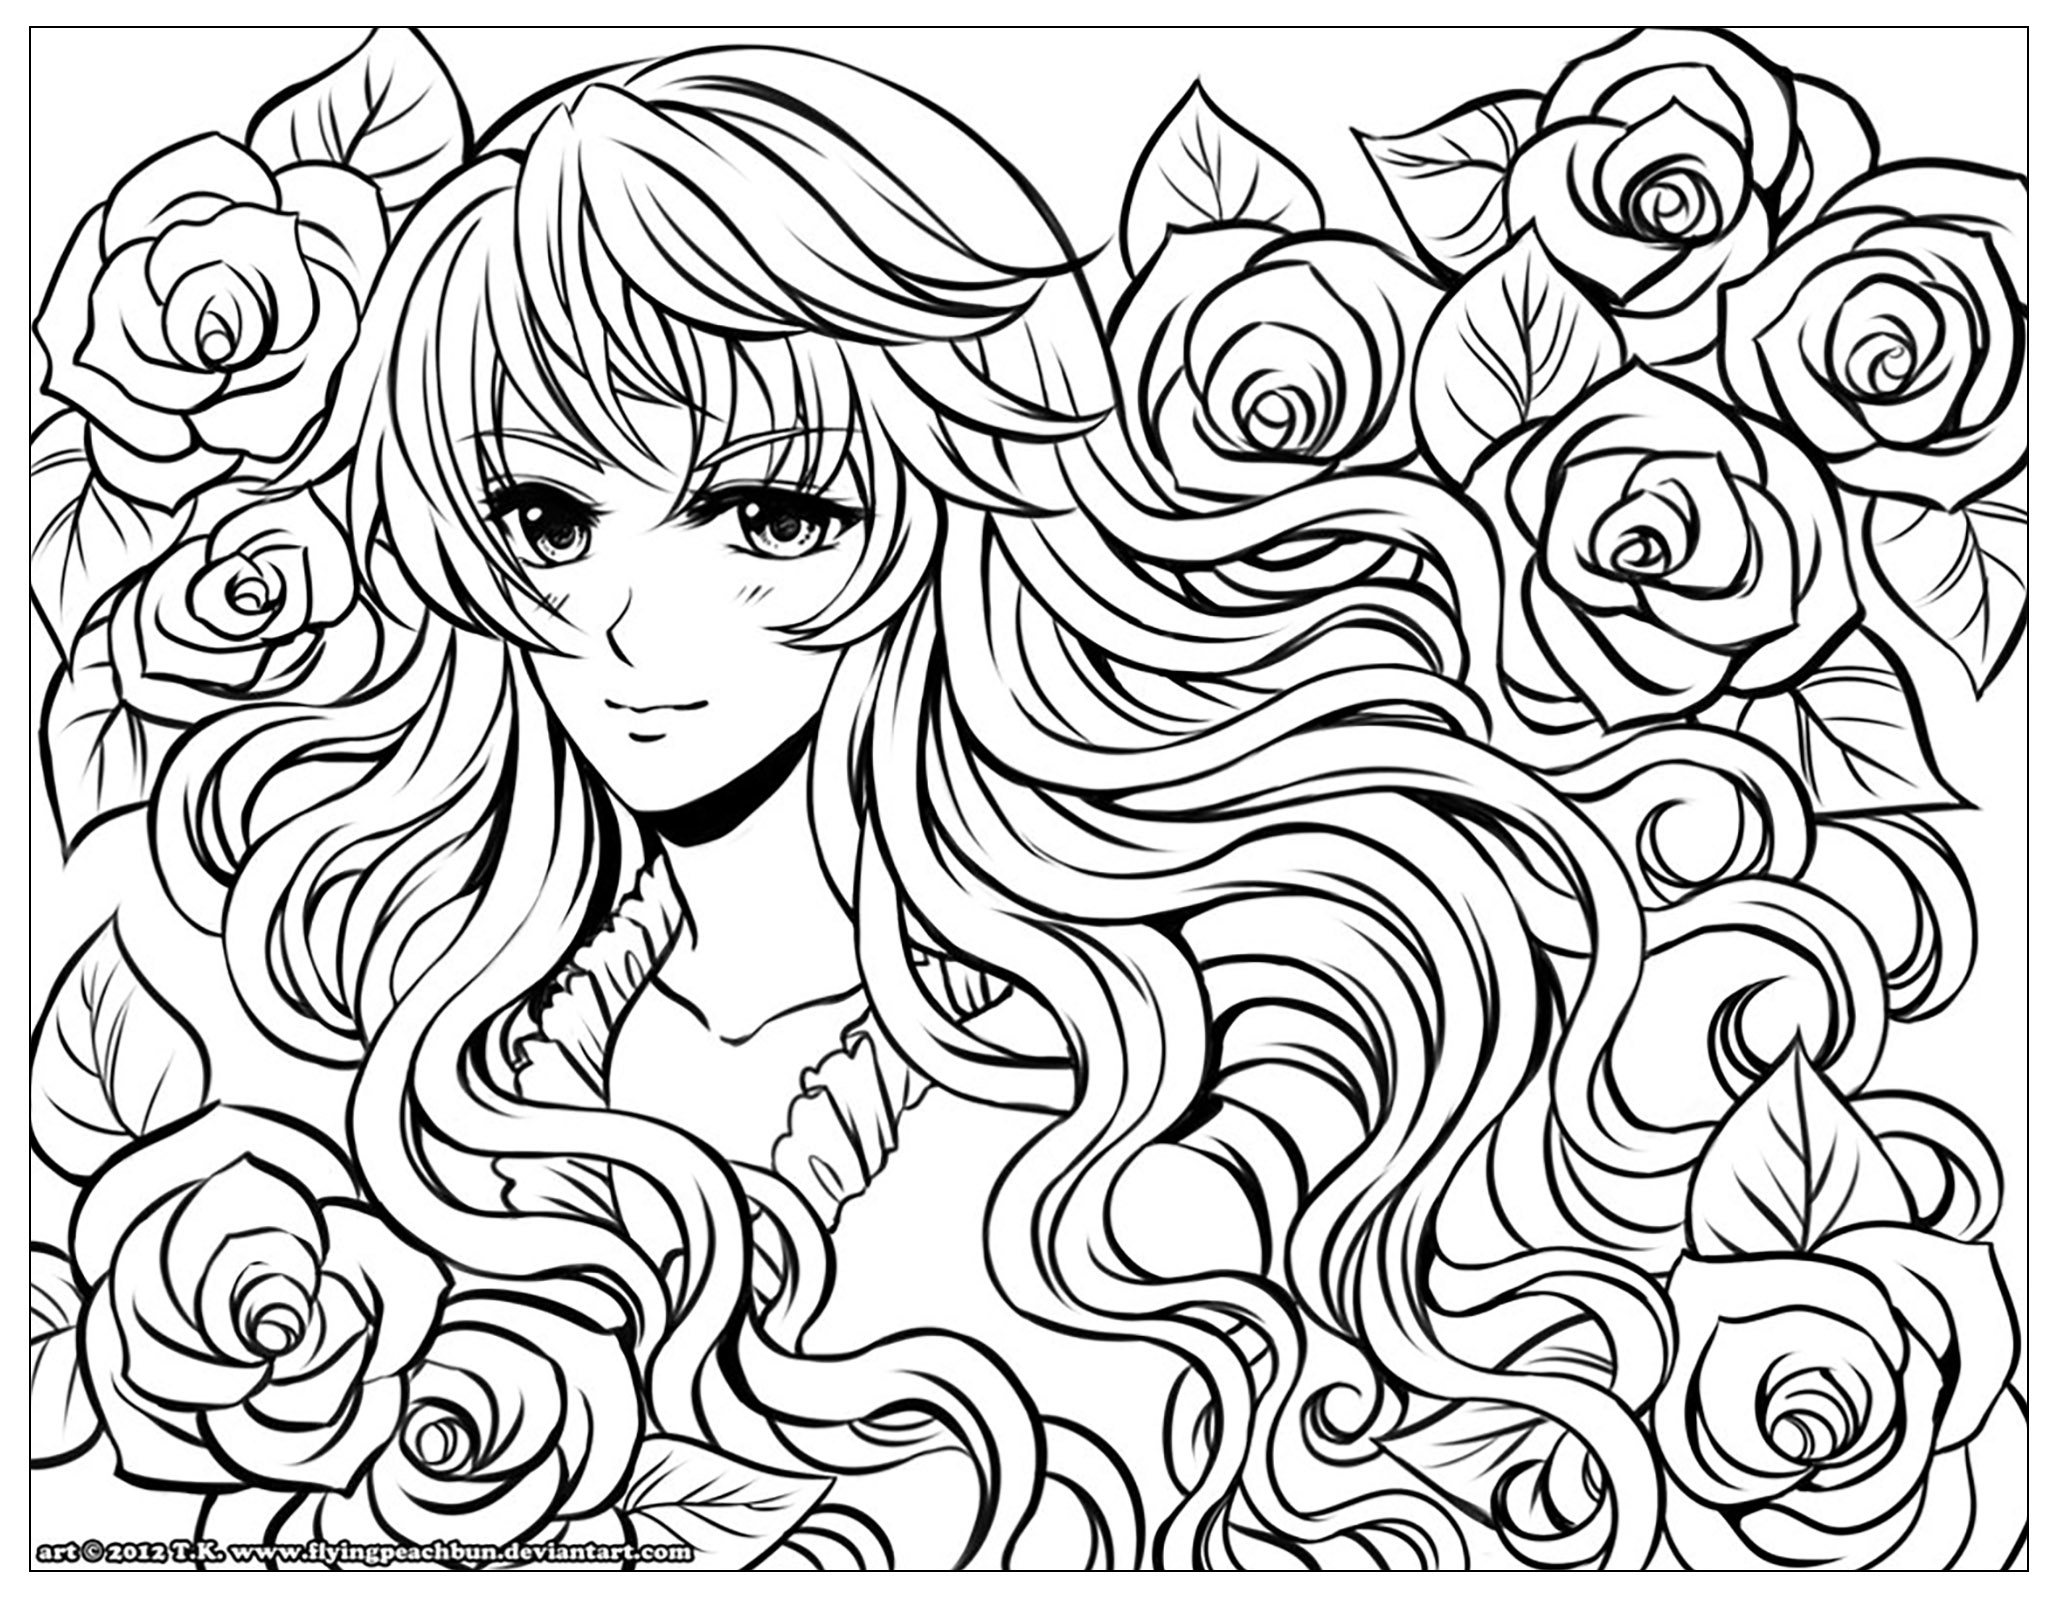 Manga to color for children - Manga Kids Coloring Pages